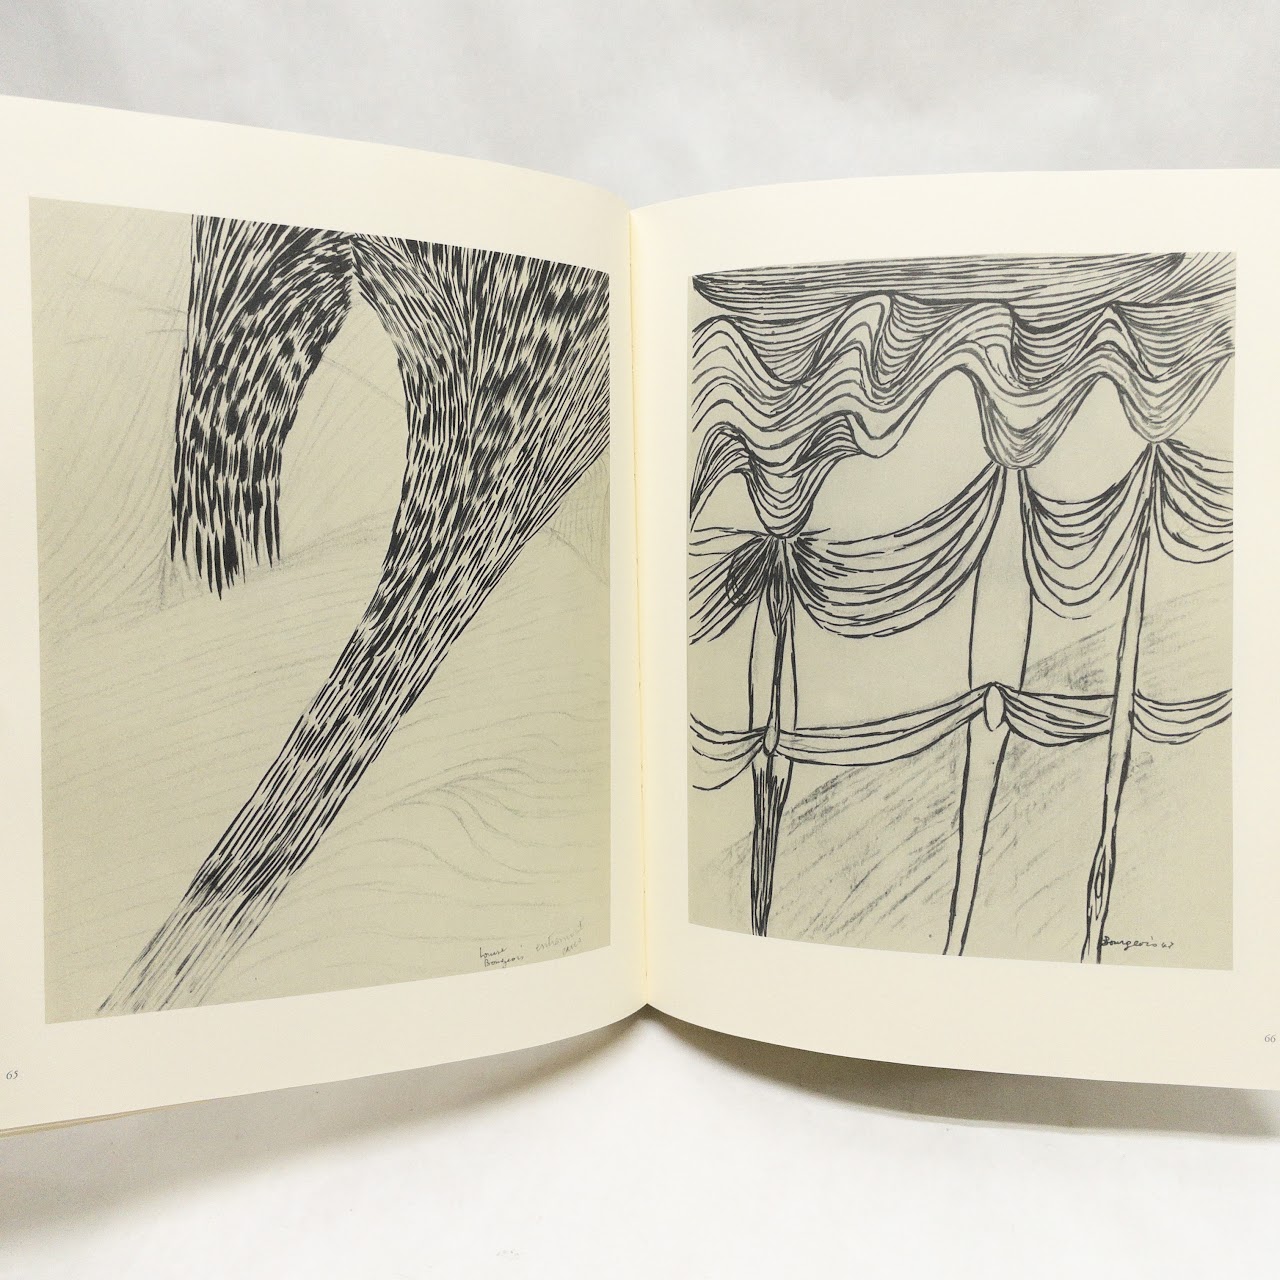 'Louise Bourgeois Drawings' Rare Book